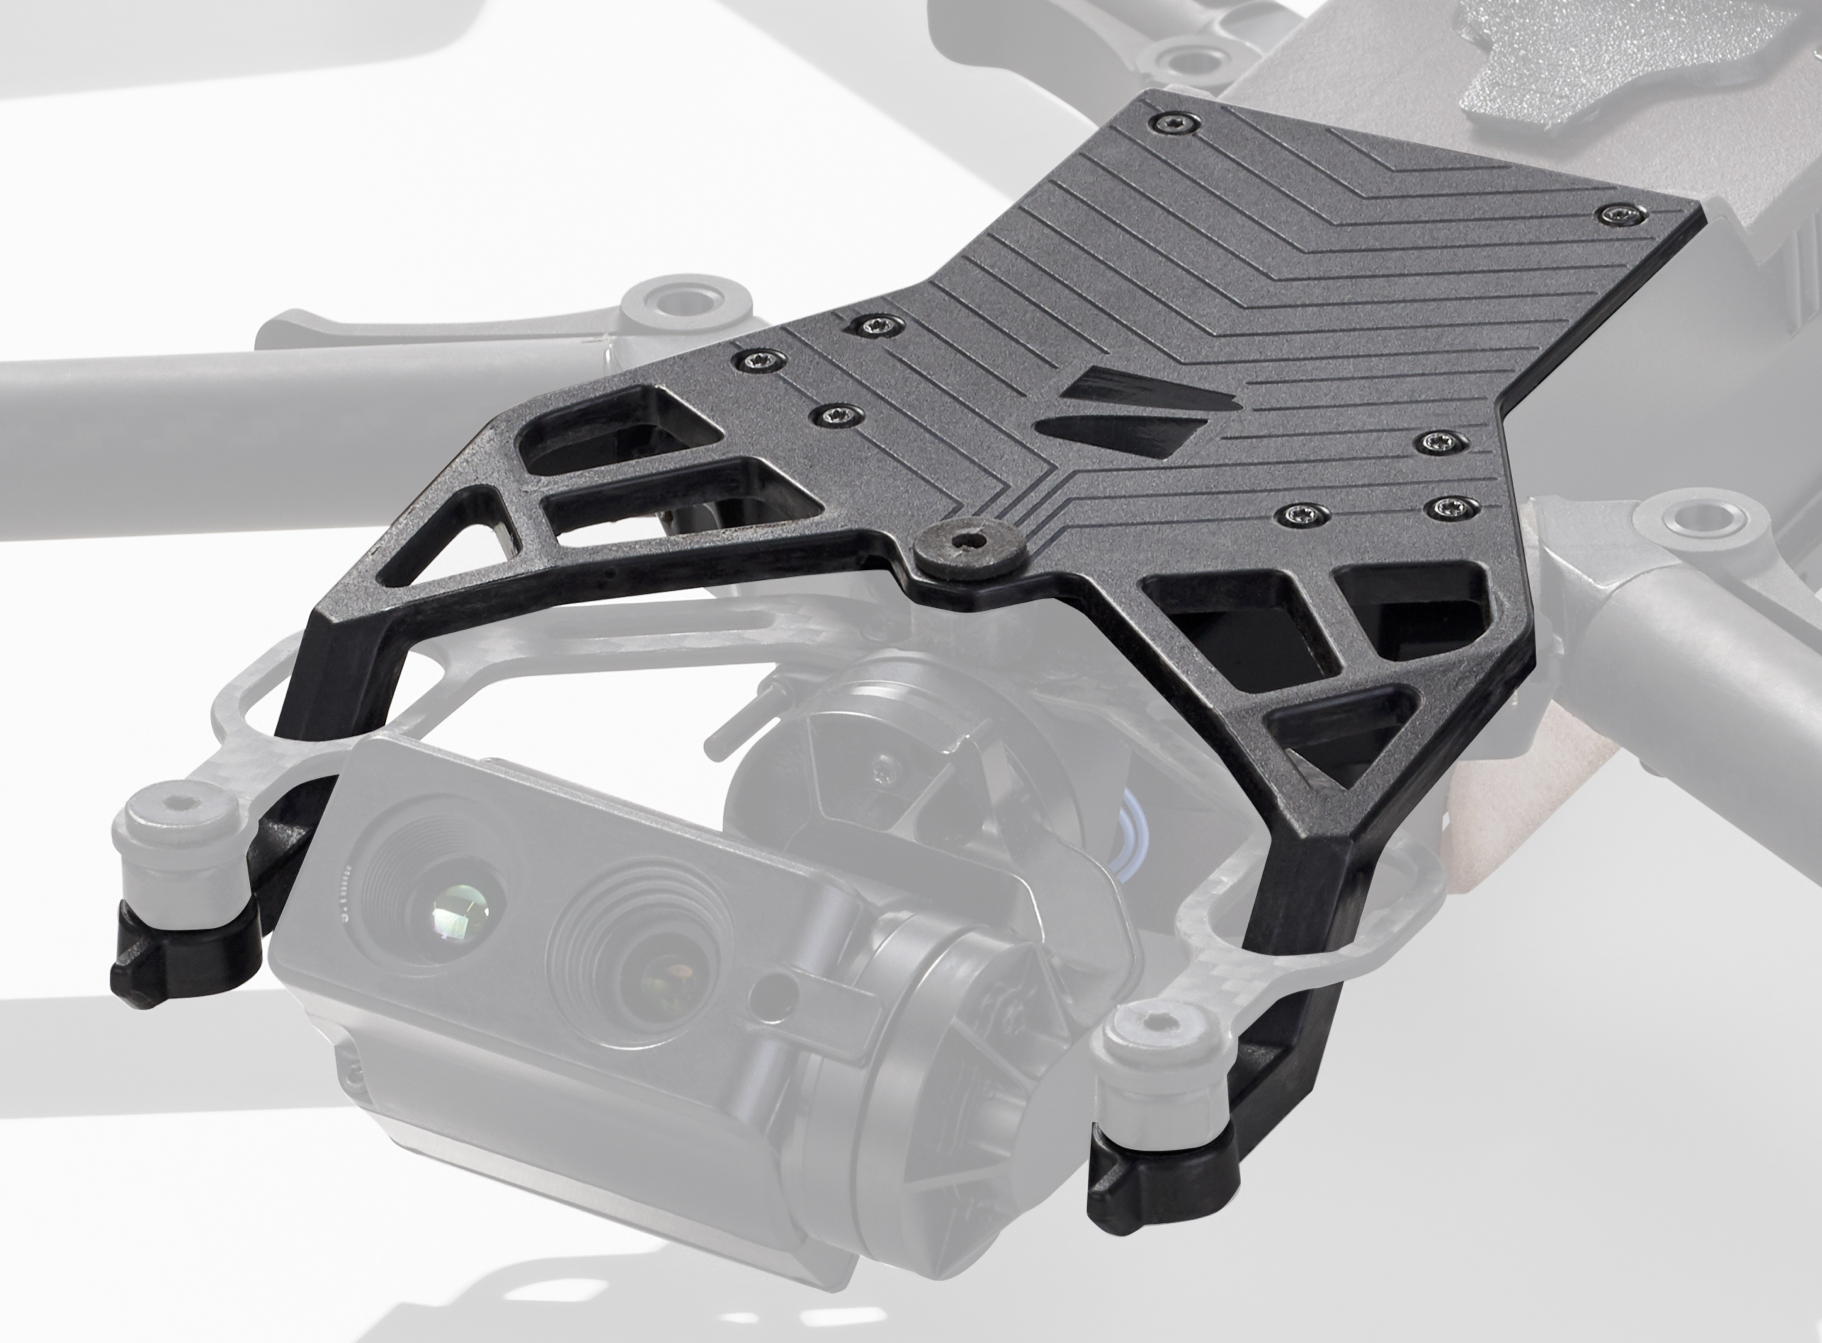 Arris Multimaterial Drone Bracket for Radio Frequency transparency and Mechanical Performance